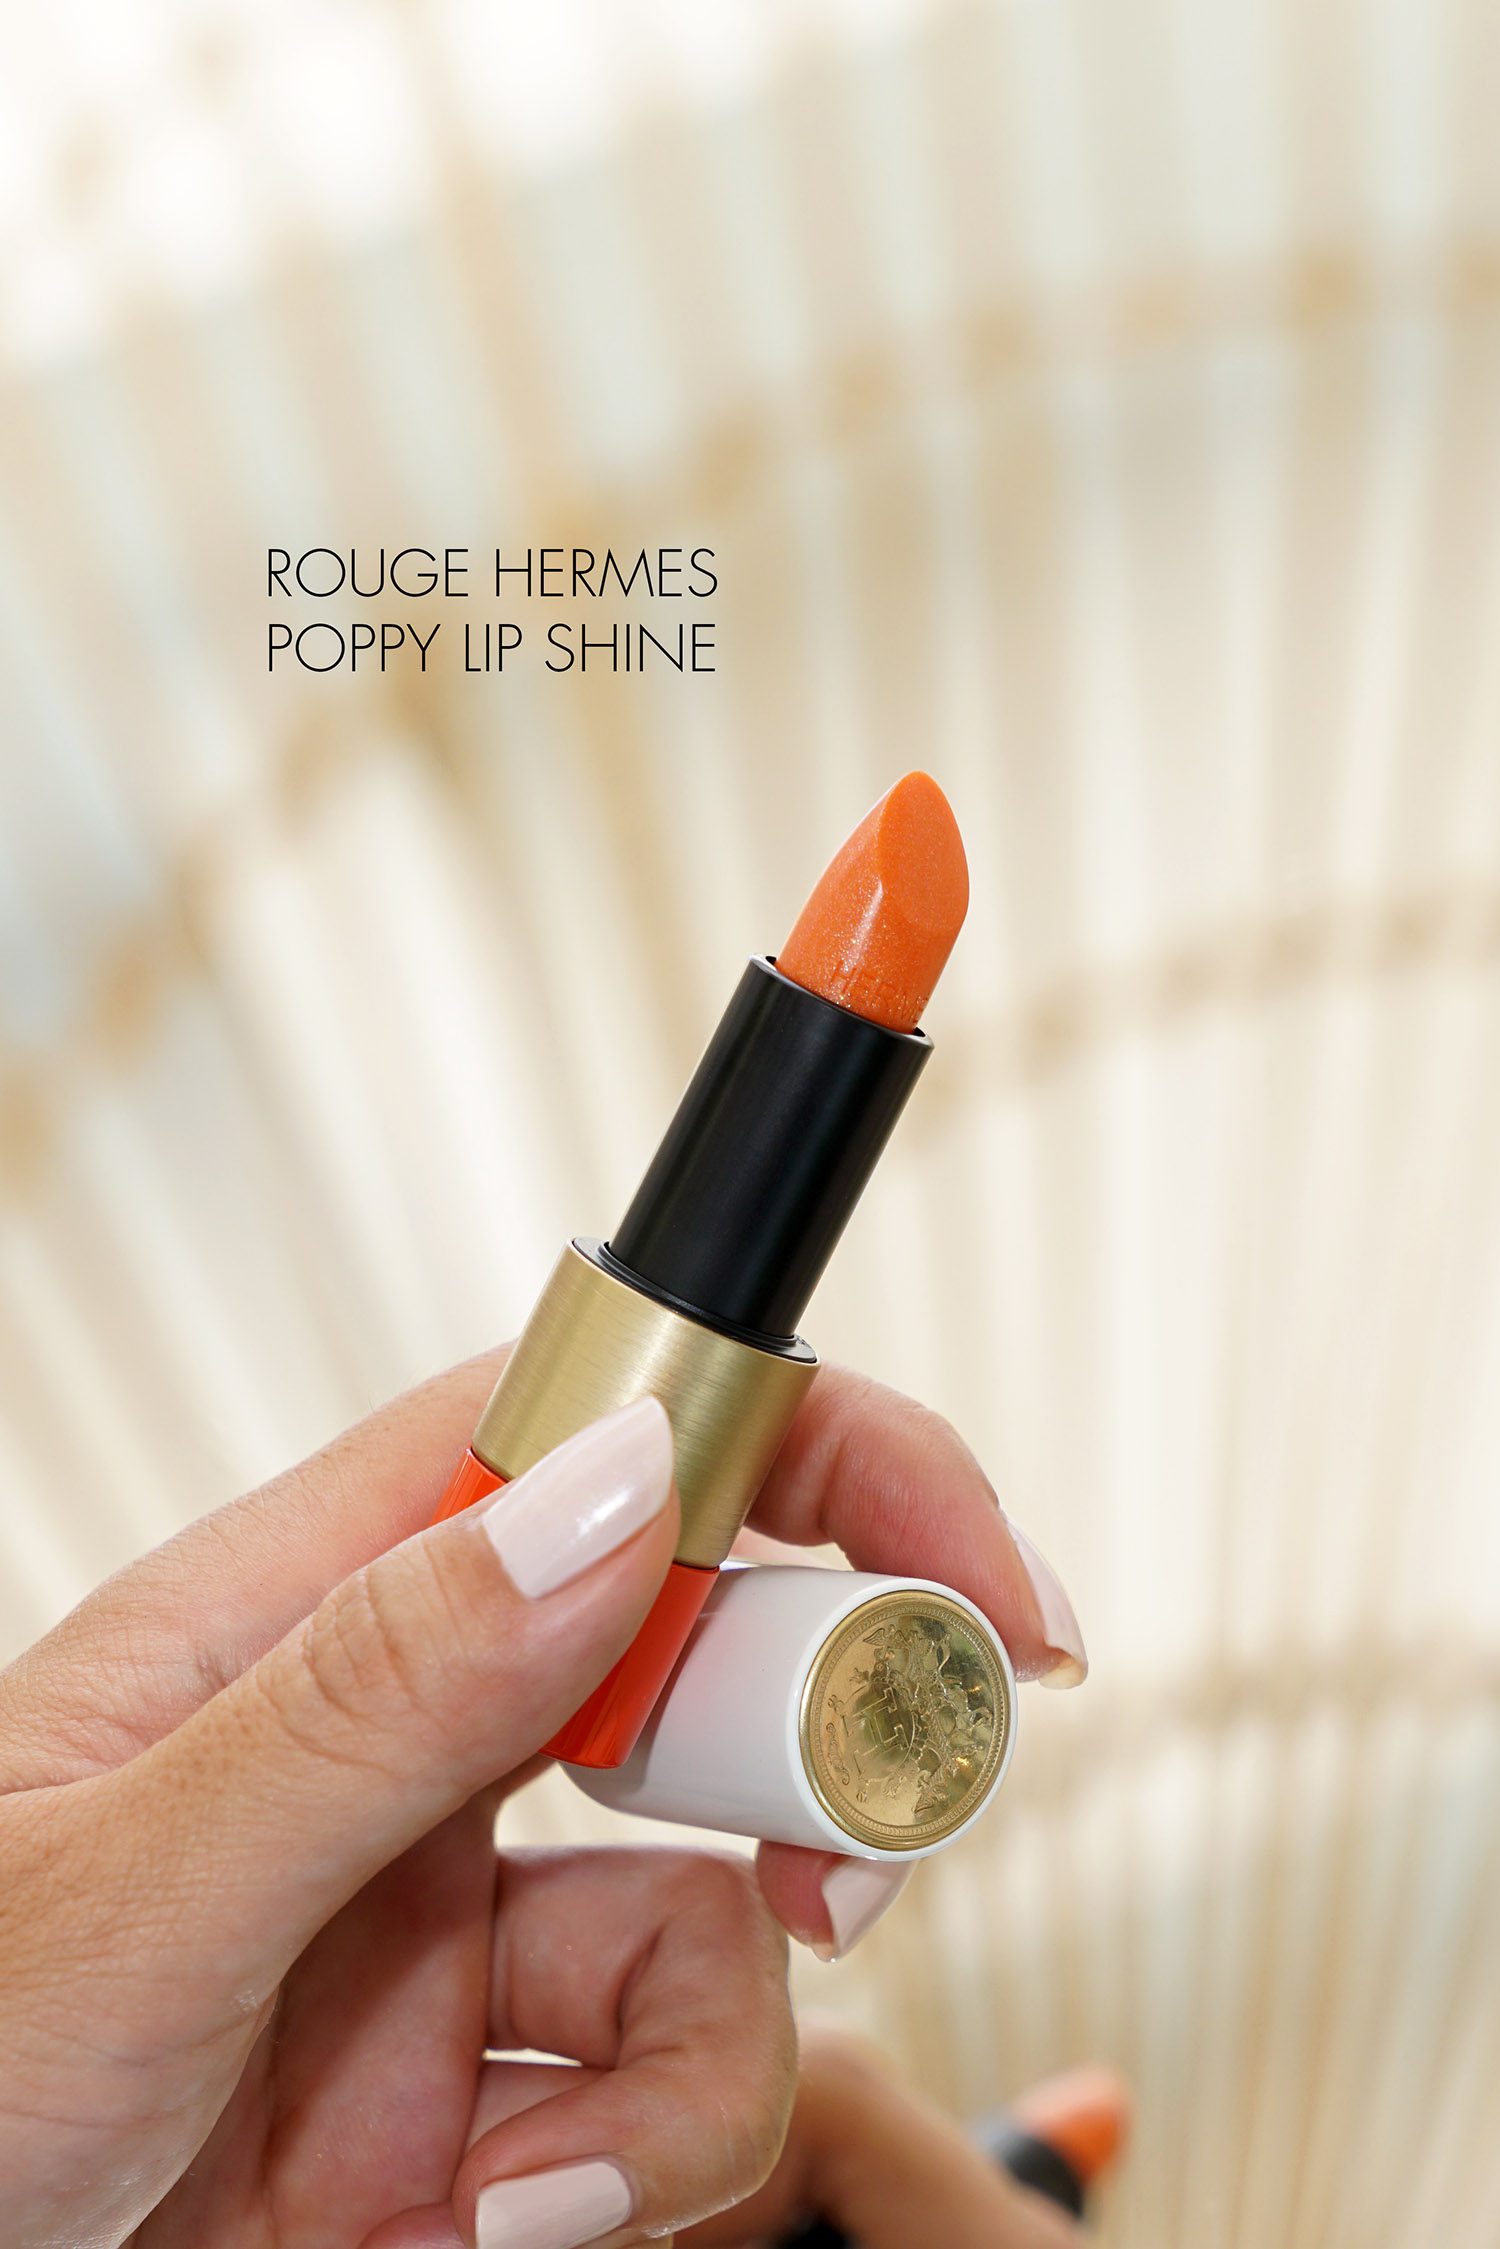 Hermès' First Makeup Product Is a Very Fancy Lipstick